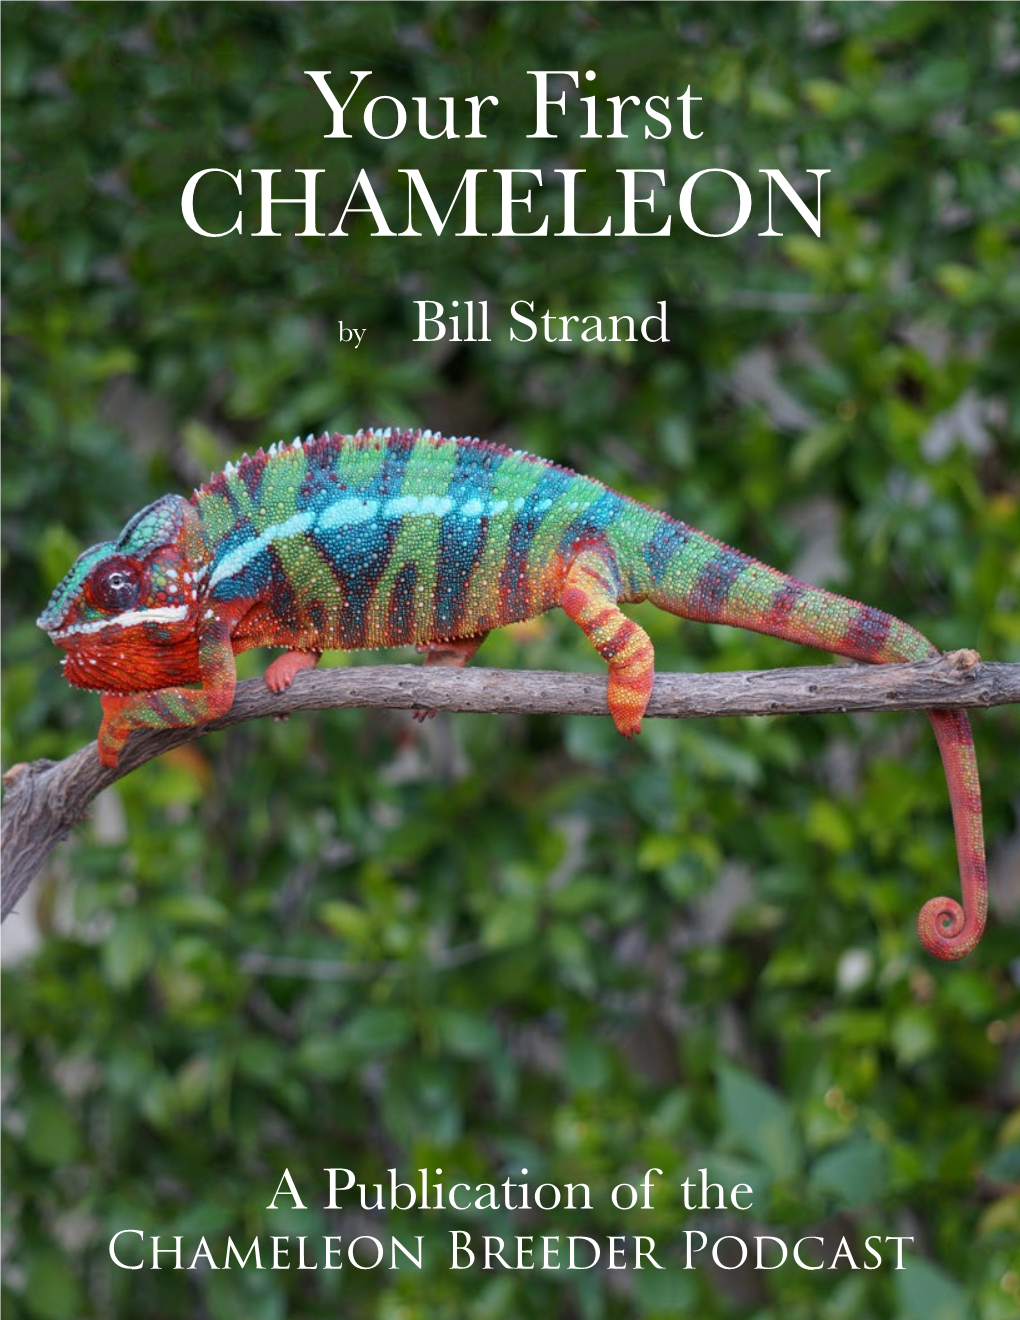 CHAMELEON Your First